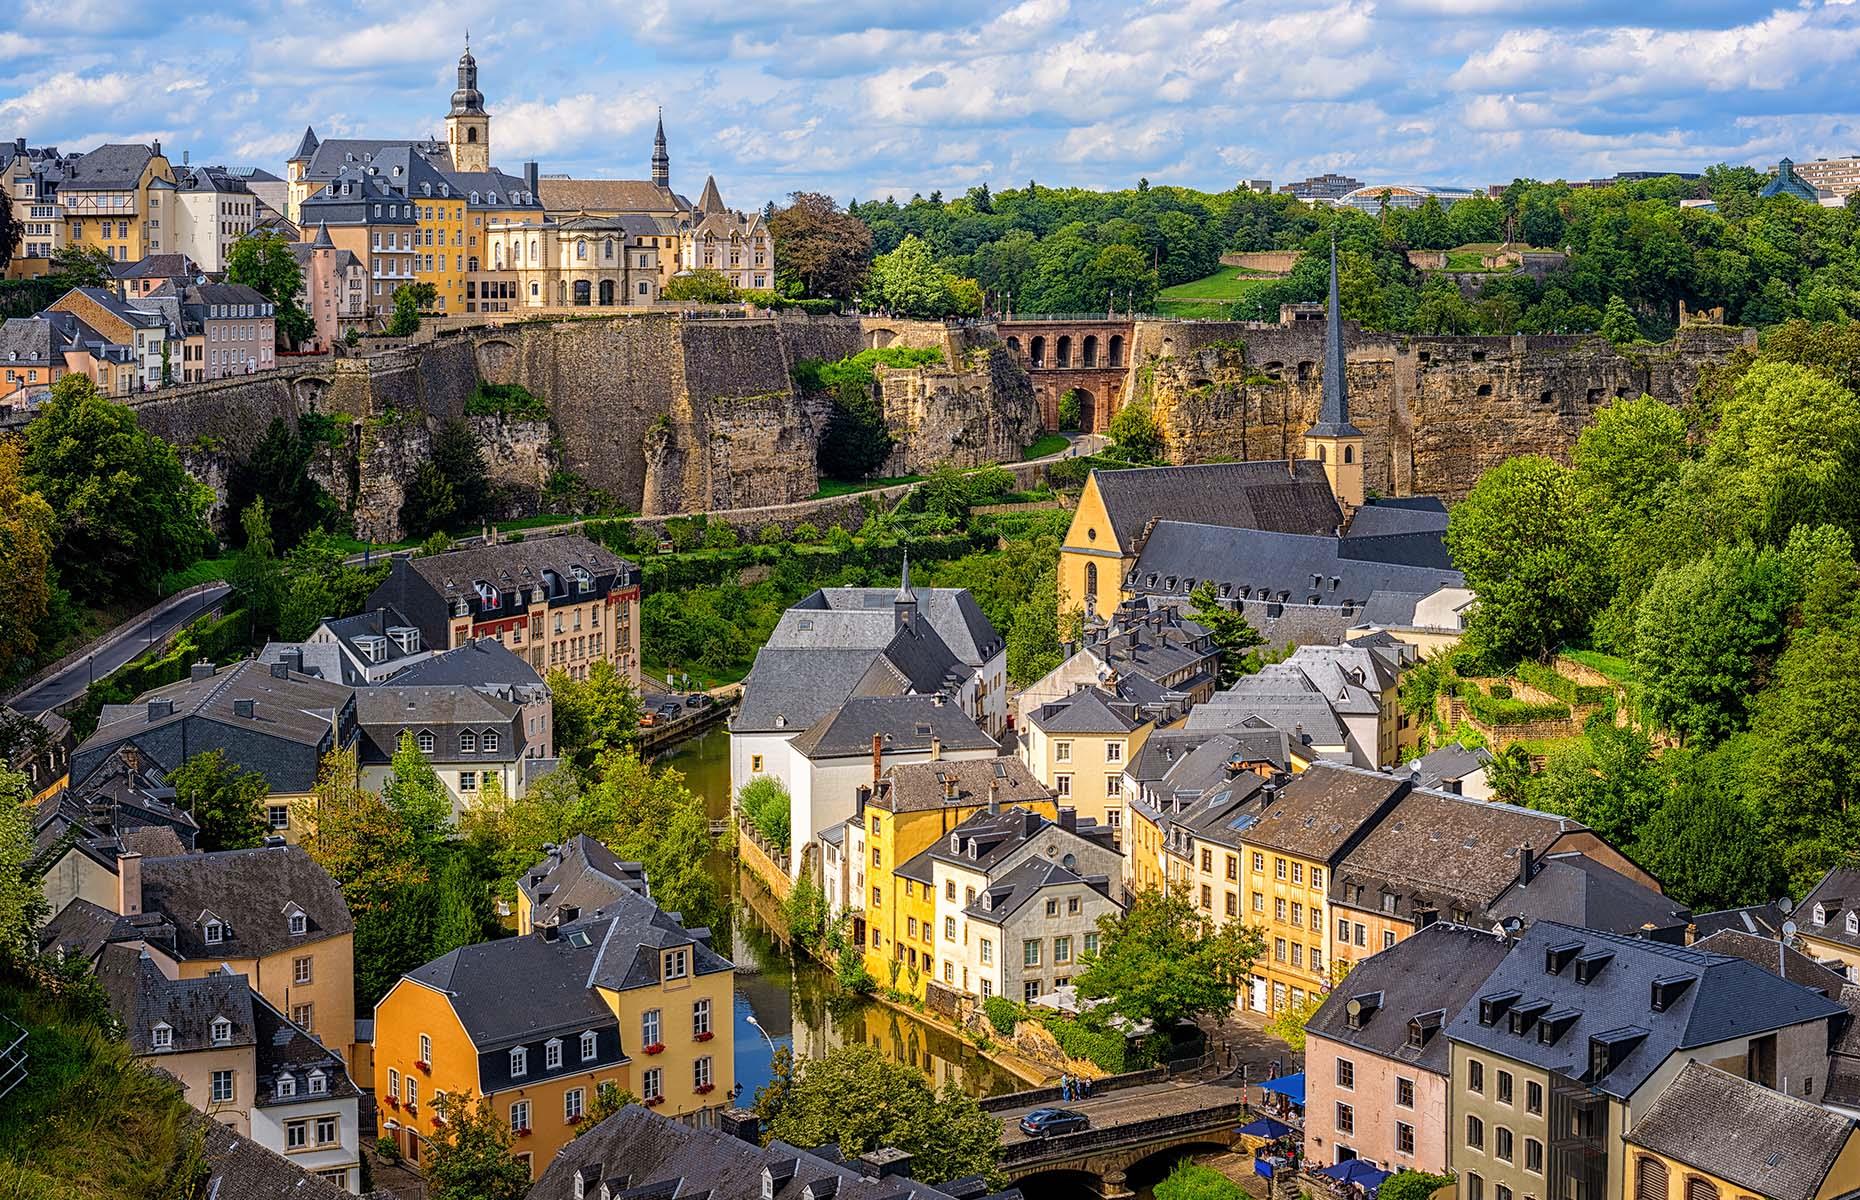 The capital of a little nation often overlooked by travelers, Luxembourg City has a fairy-tale feel about it with a grand palace overlooking quaint, cobbled streets. Surrounded by forest-clad valleys and vineyards, it's an ideal destination for gourmands – there's an impressive number of restaurants featured in the Michelin Guide, nine of which have received at least one star.